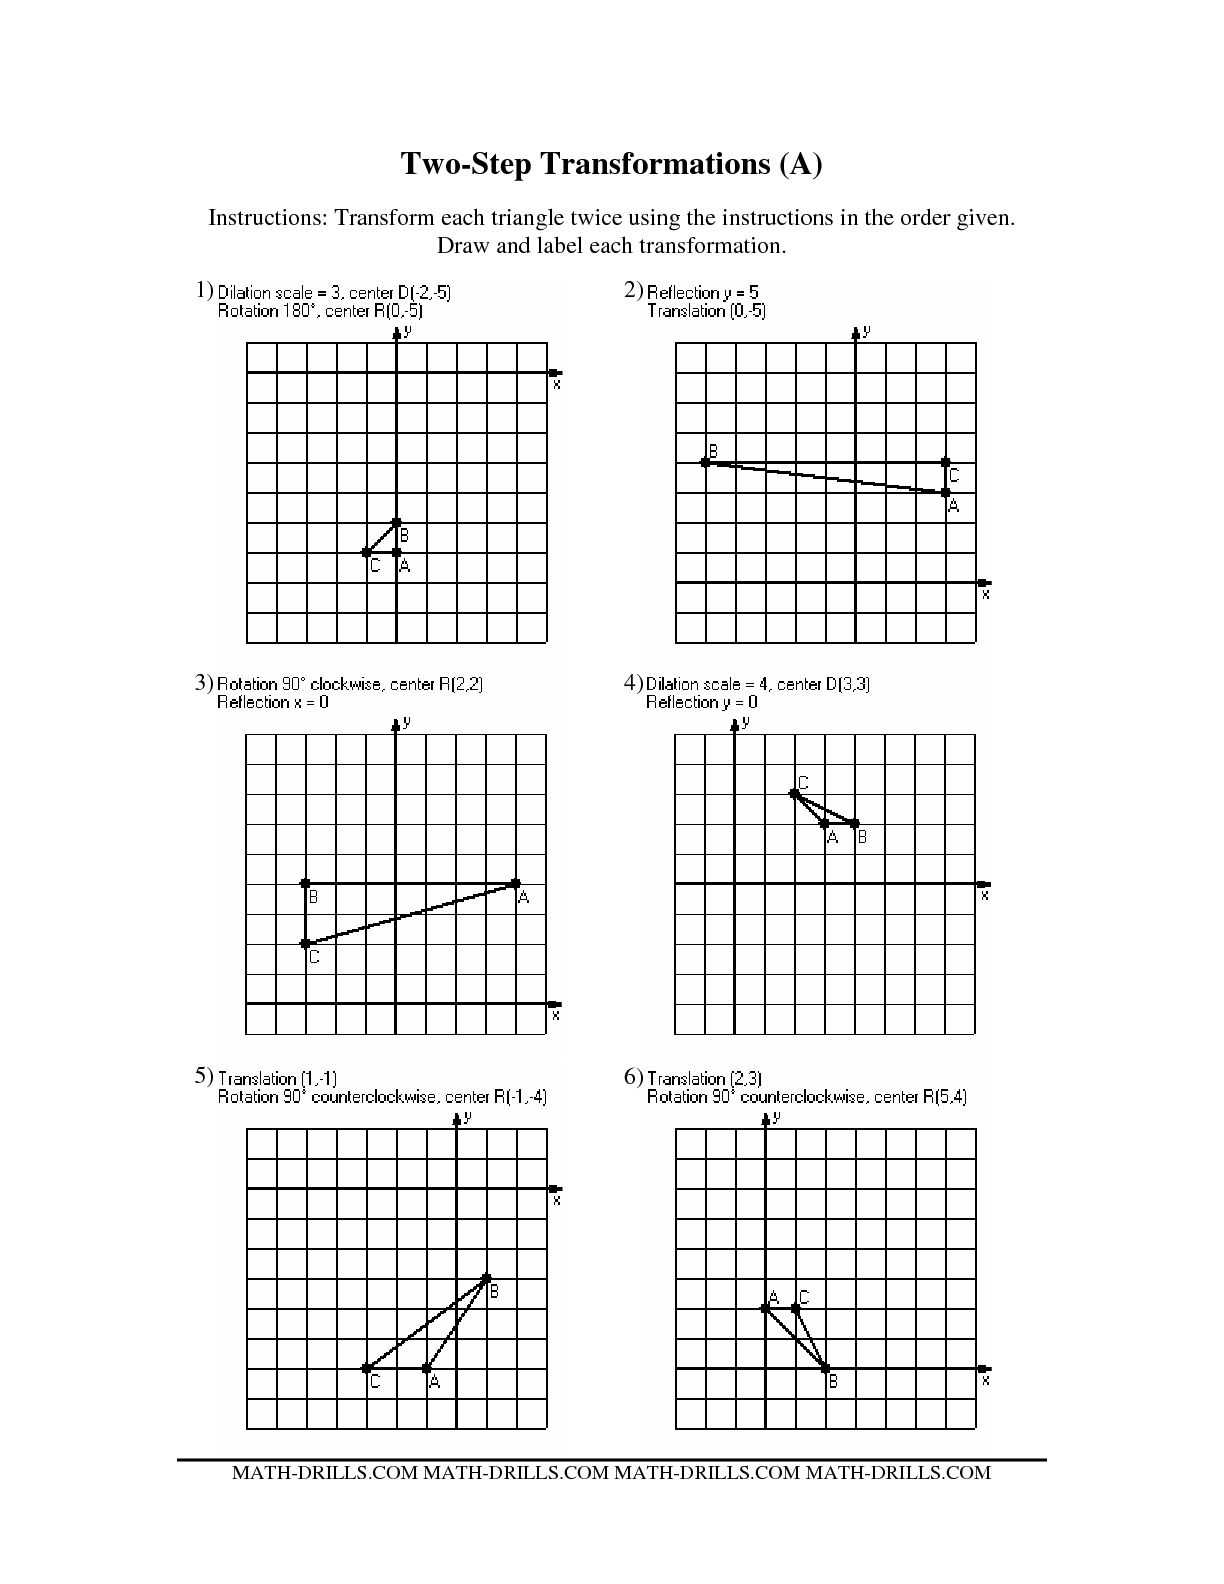 Energy Transformation Worksheet Answers as Well as Free Worksheets Library Download and Print Worksheets